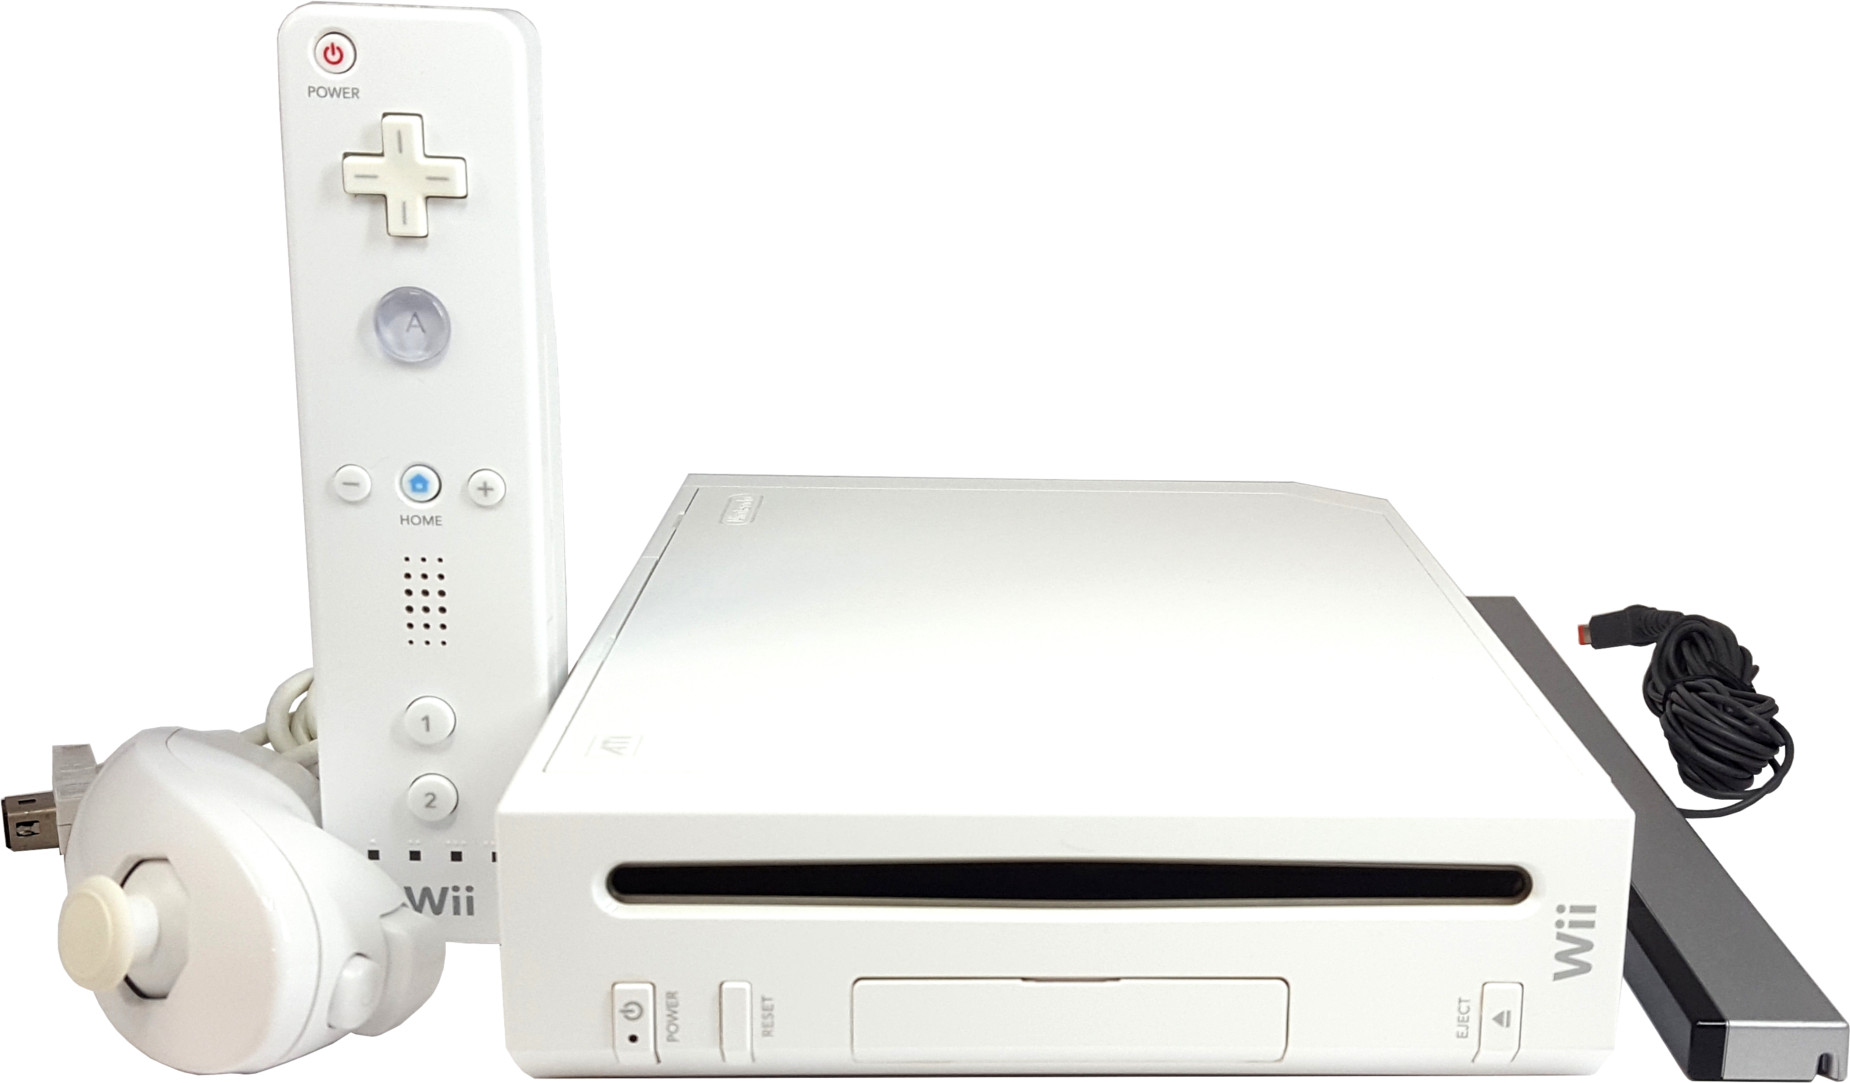 Restored Nintendo Wii Video Game Console (White) Matching Remote and Nunchuk Controllers (Refurbished) - image 1 of 4